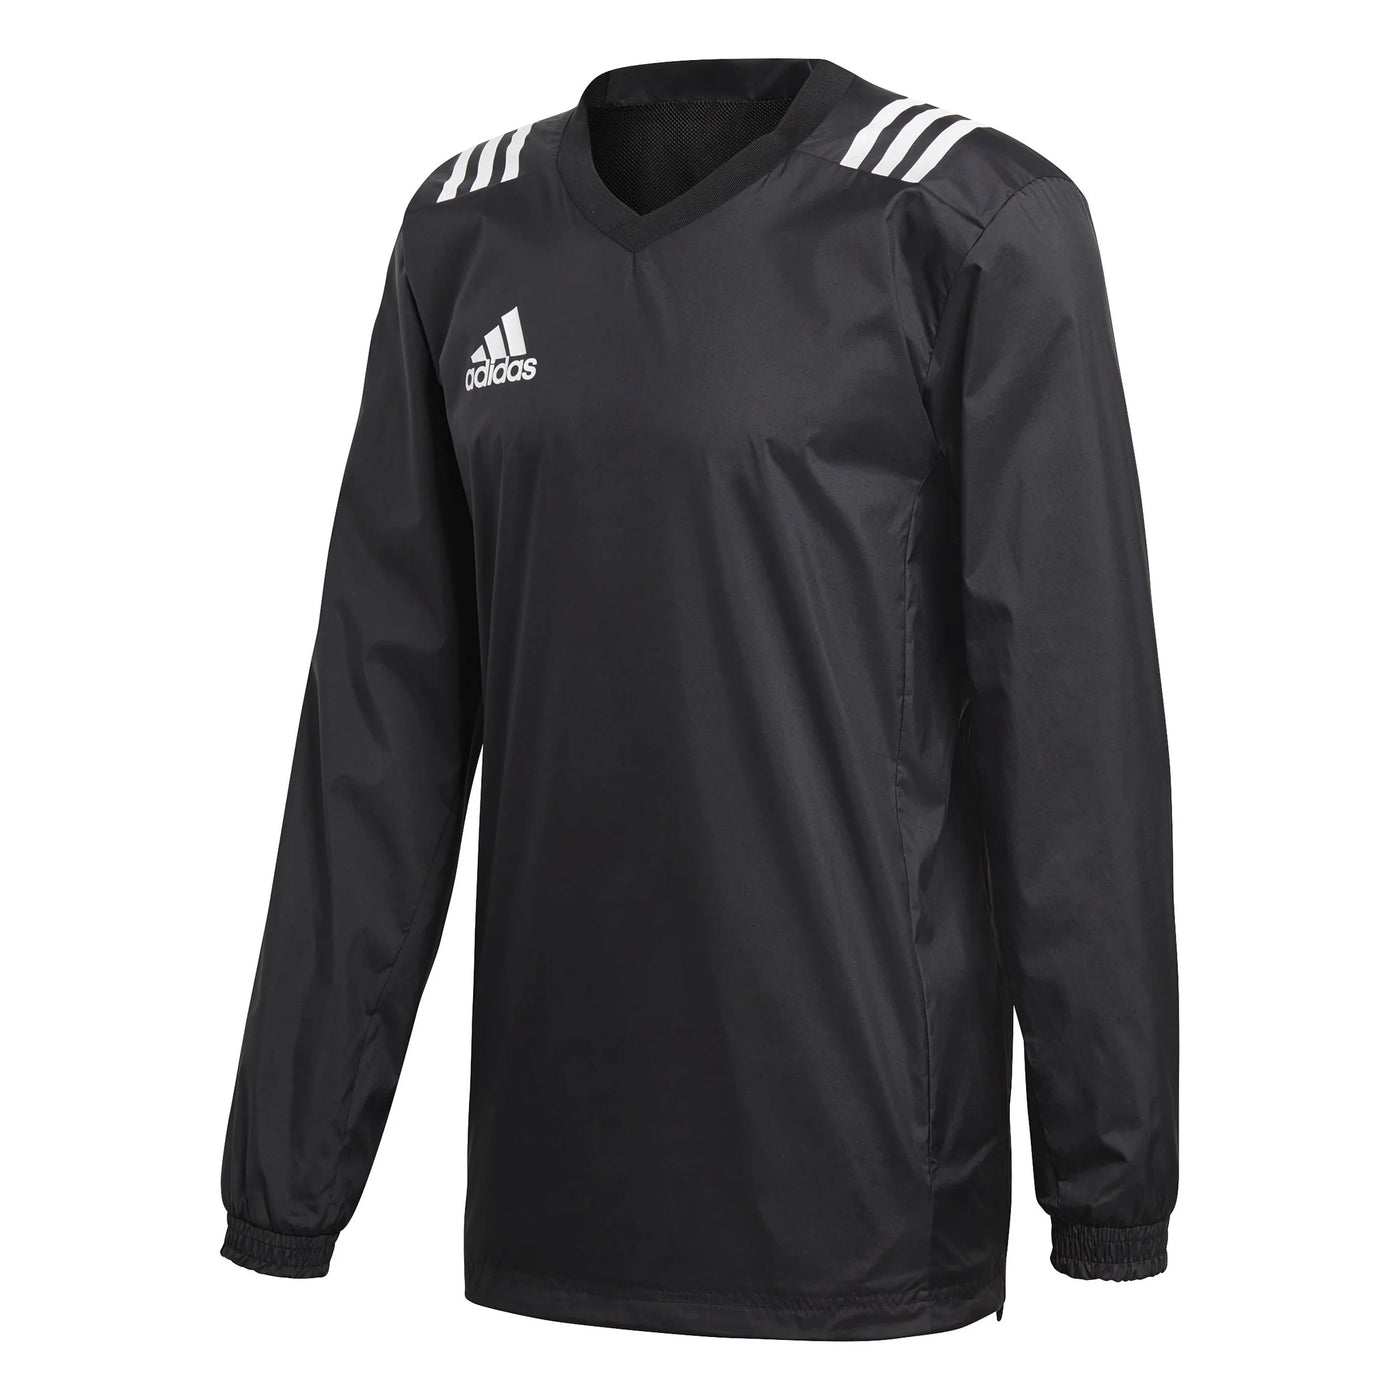 Adidas Rugby Contact Top